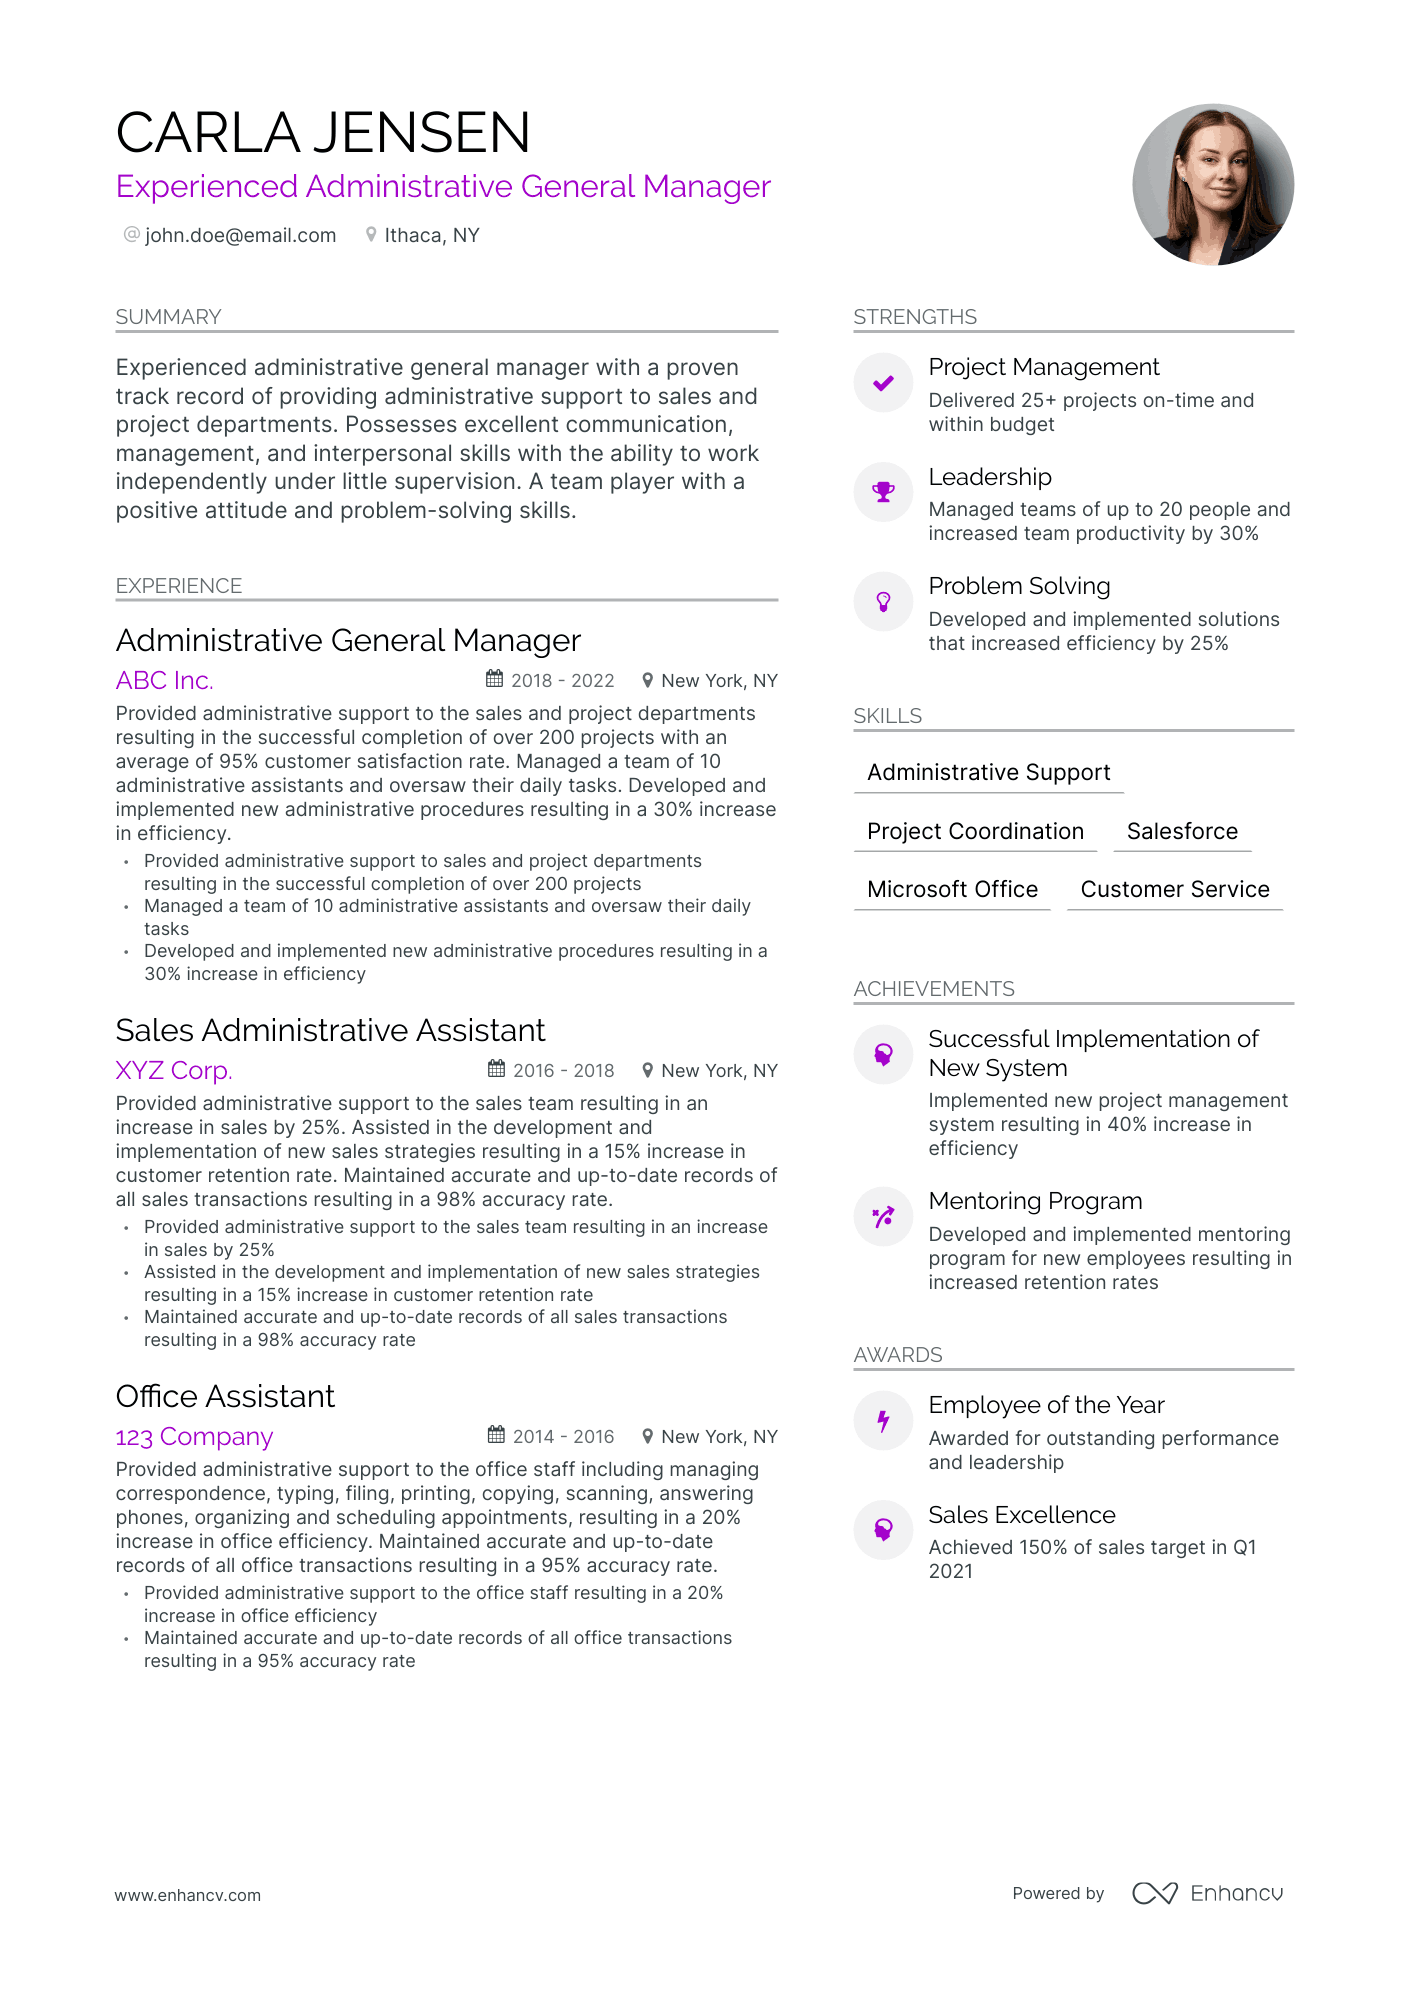 Modern Administrative General Manager Resume Template